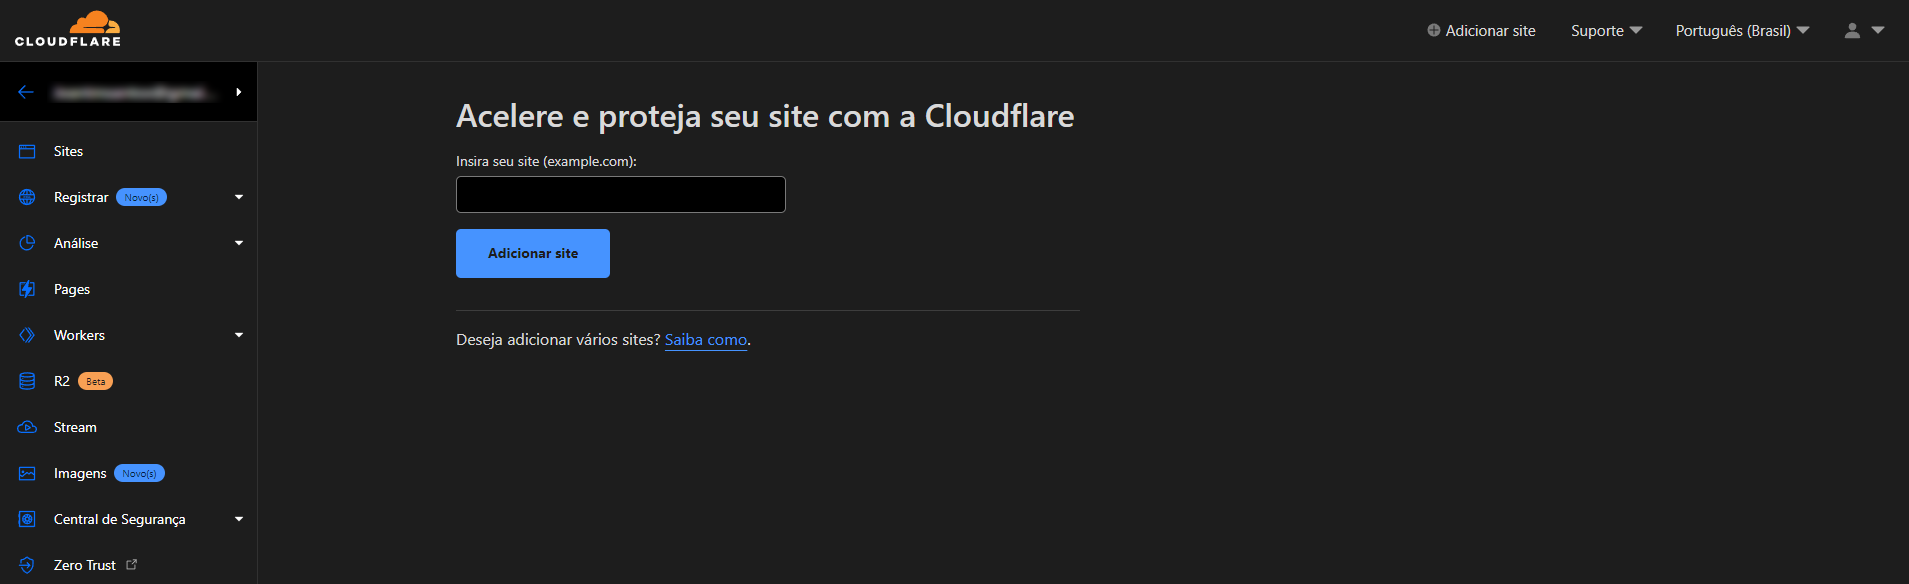 CloudFlare-03